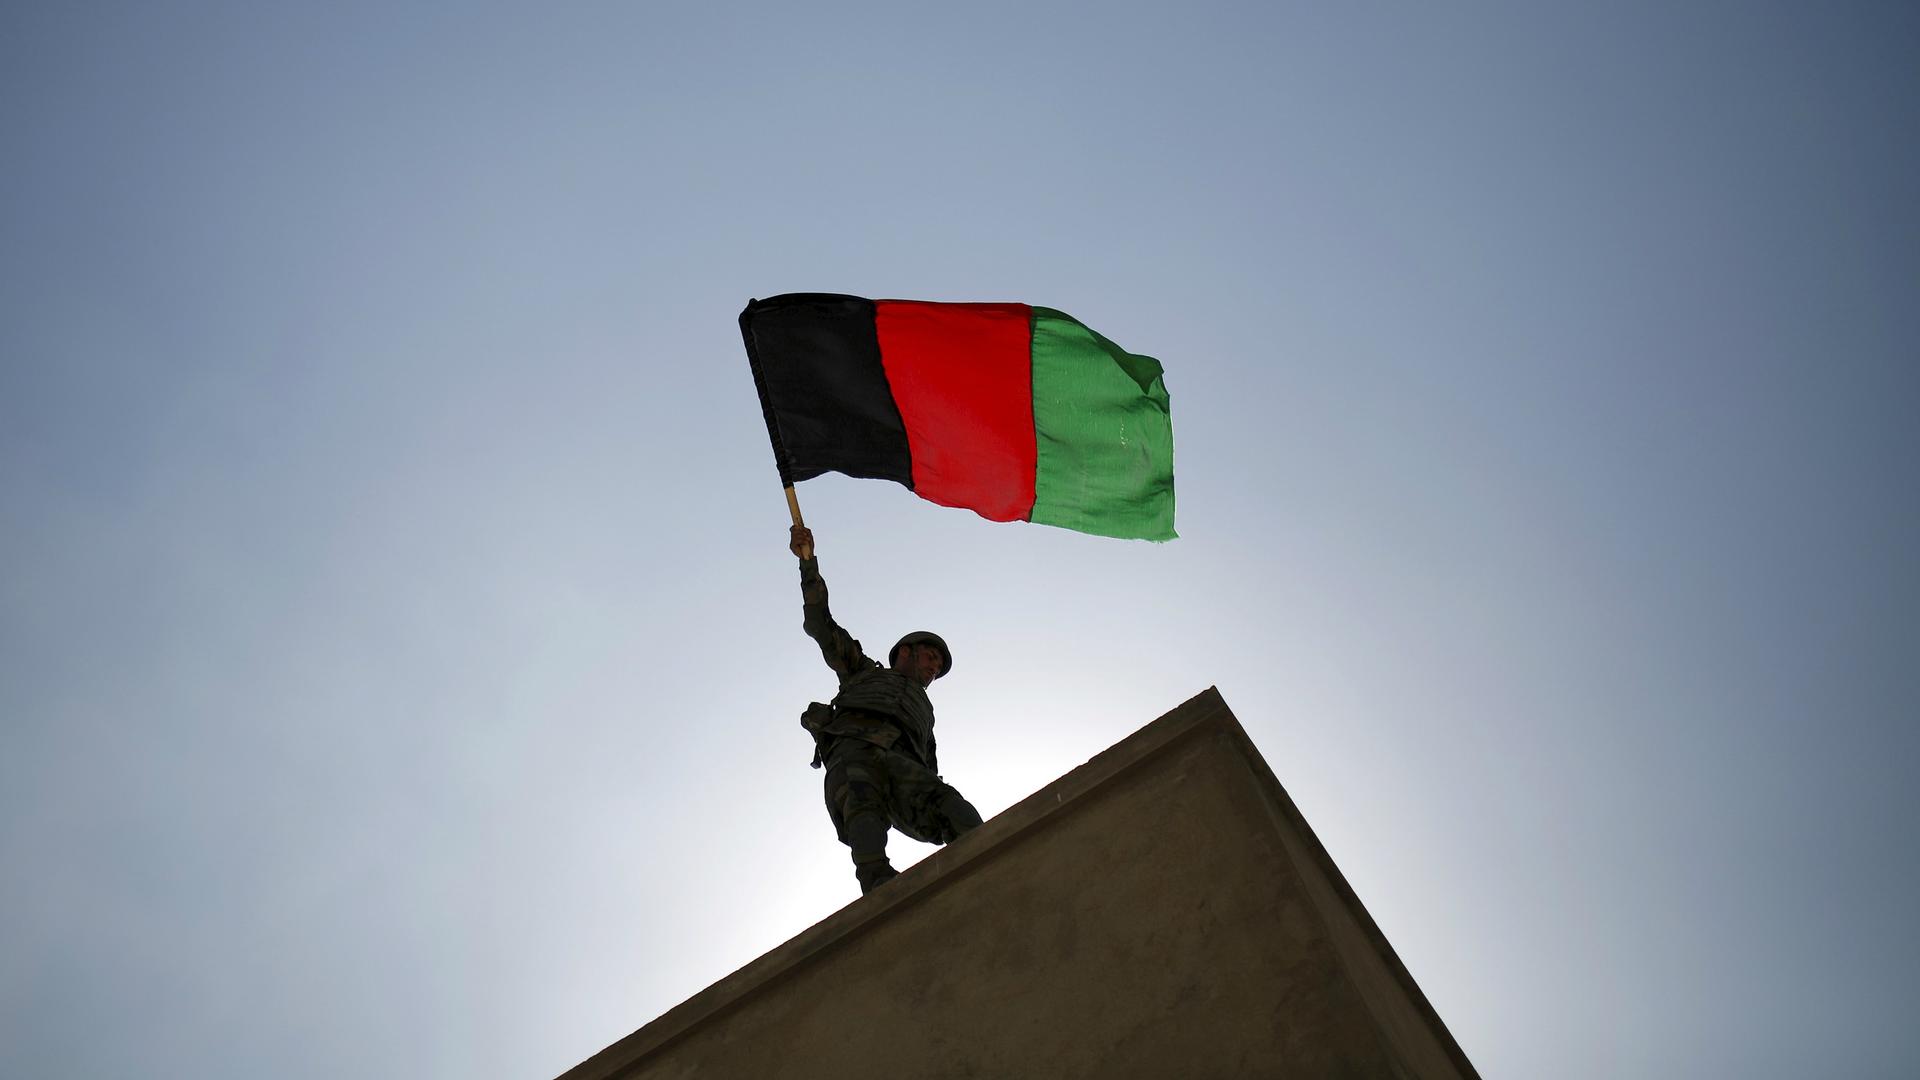 An Afghan National Army officer holds an Afghanistan flag during a training exercise at the Kabul Military Training Centre in Afghanistan, Oct. 7, 2015.